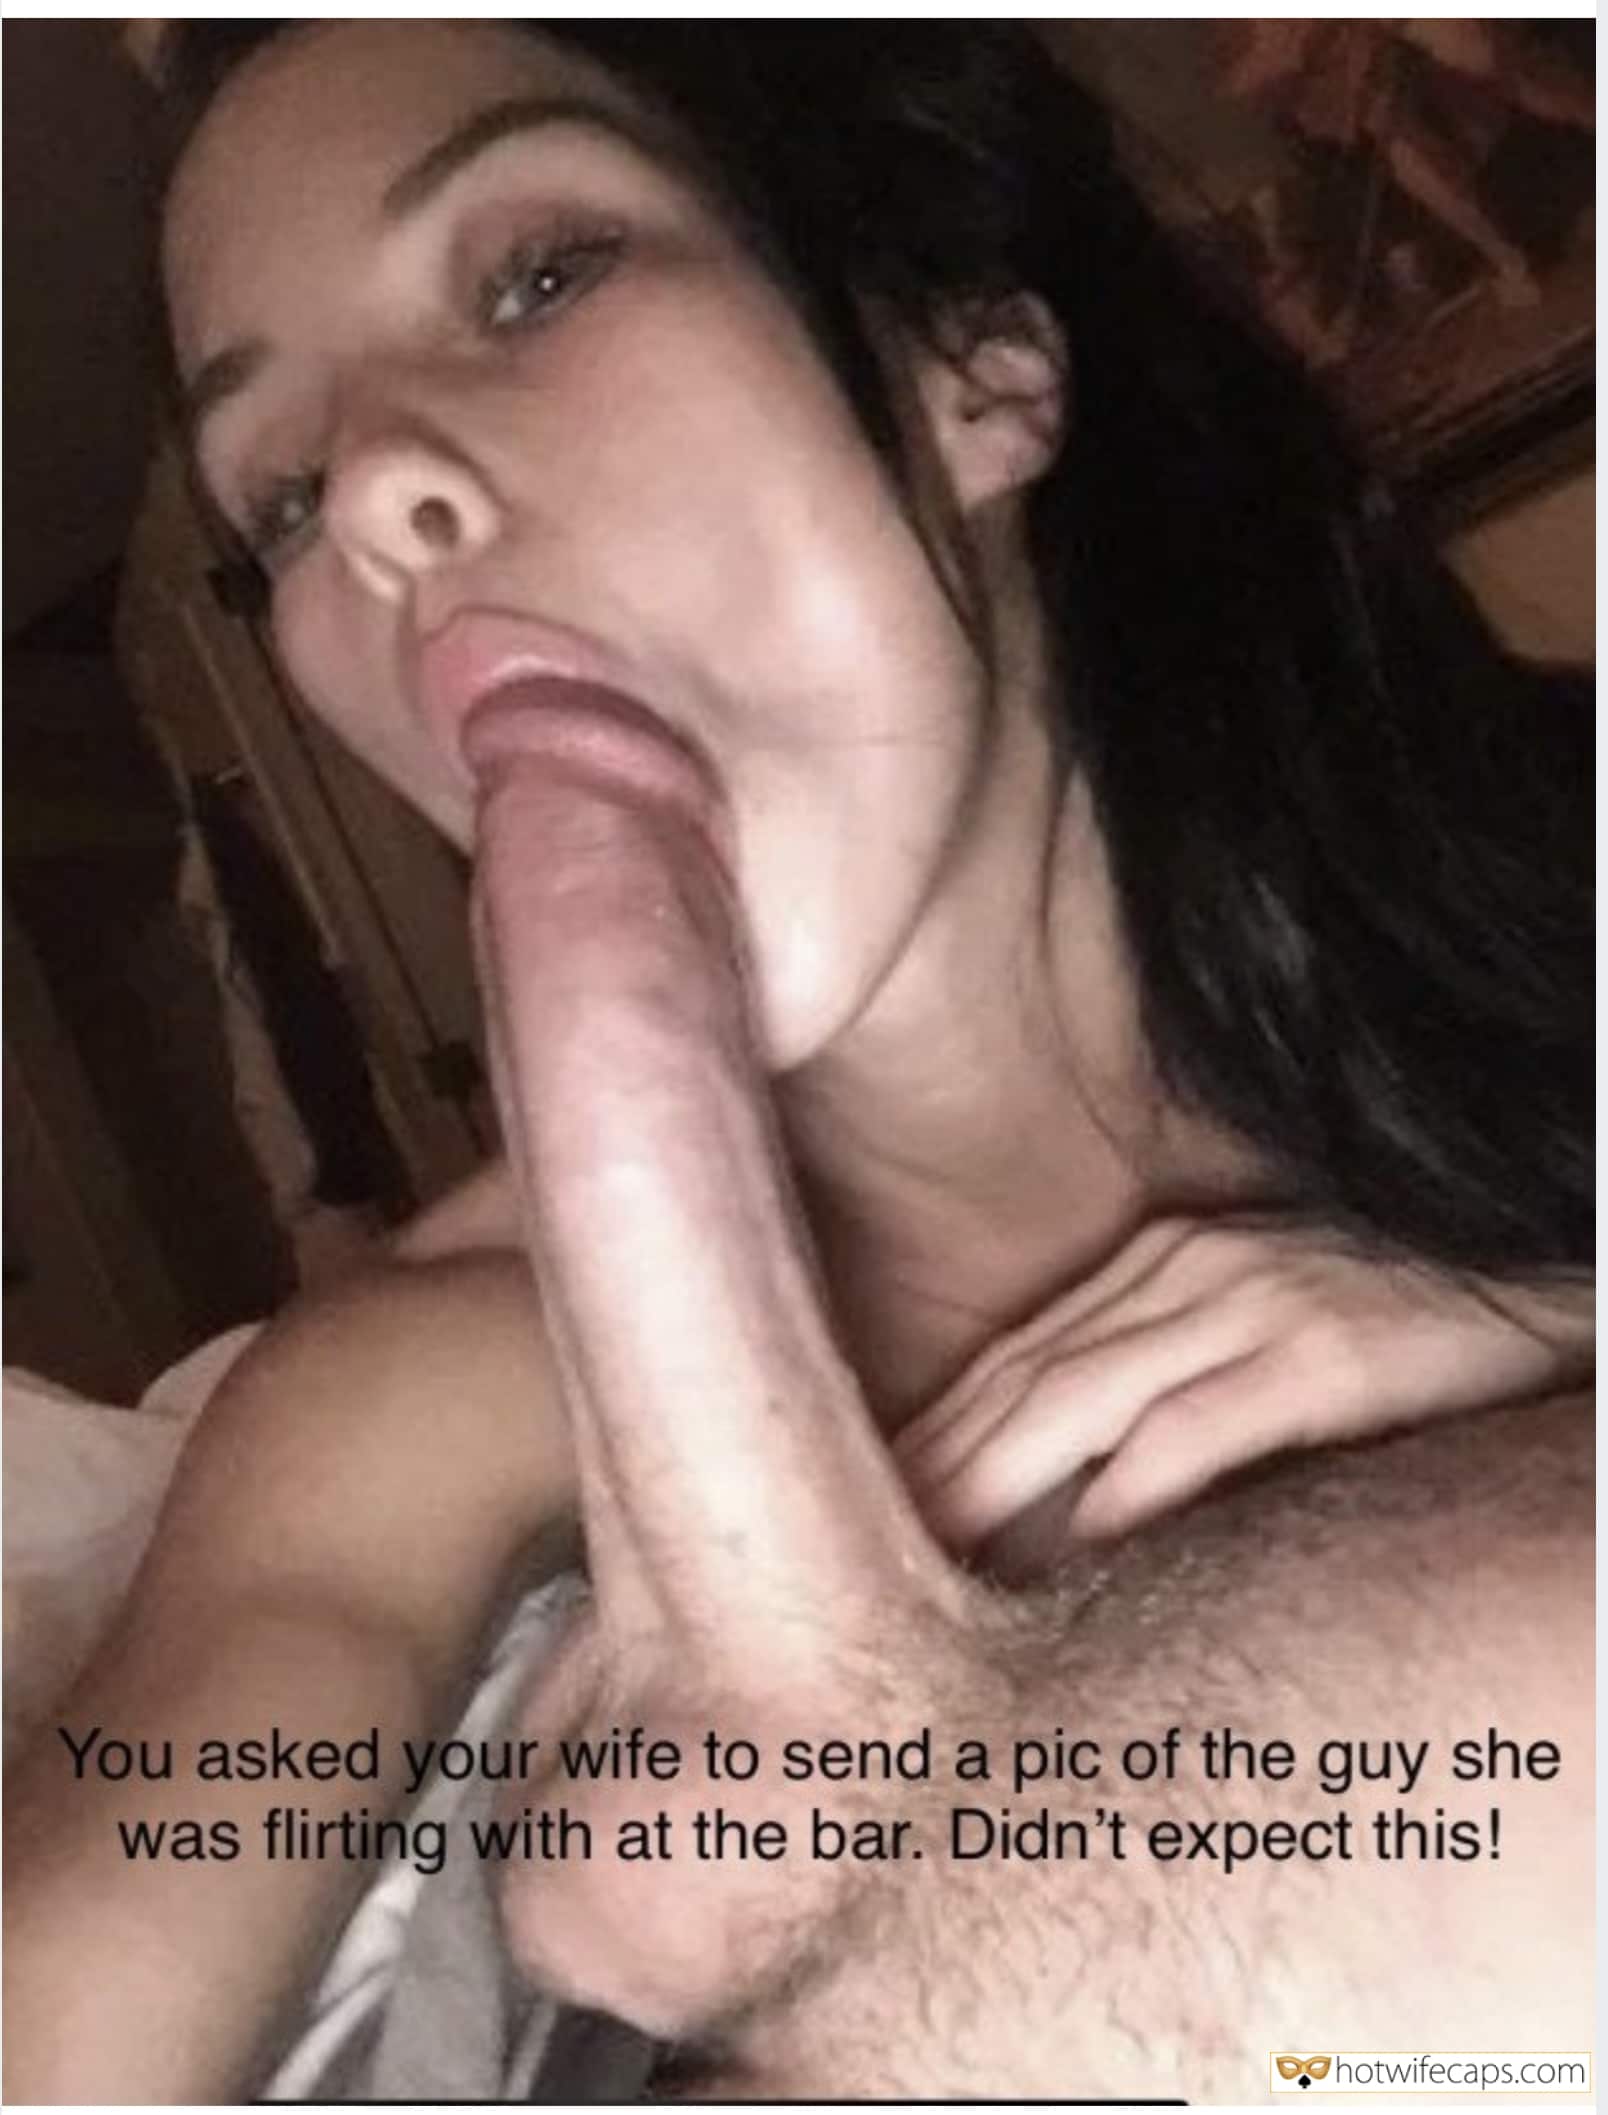 Cheating Blowjob Bigger Cock hotwife caption: You asked your wife to send a pic of the guy she was flirting with at the bar. Didn’t expect this! sucking big cock hotwife online flirt caption huge dickpic porn caption Sucking His Big Pulsating Dick Head